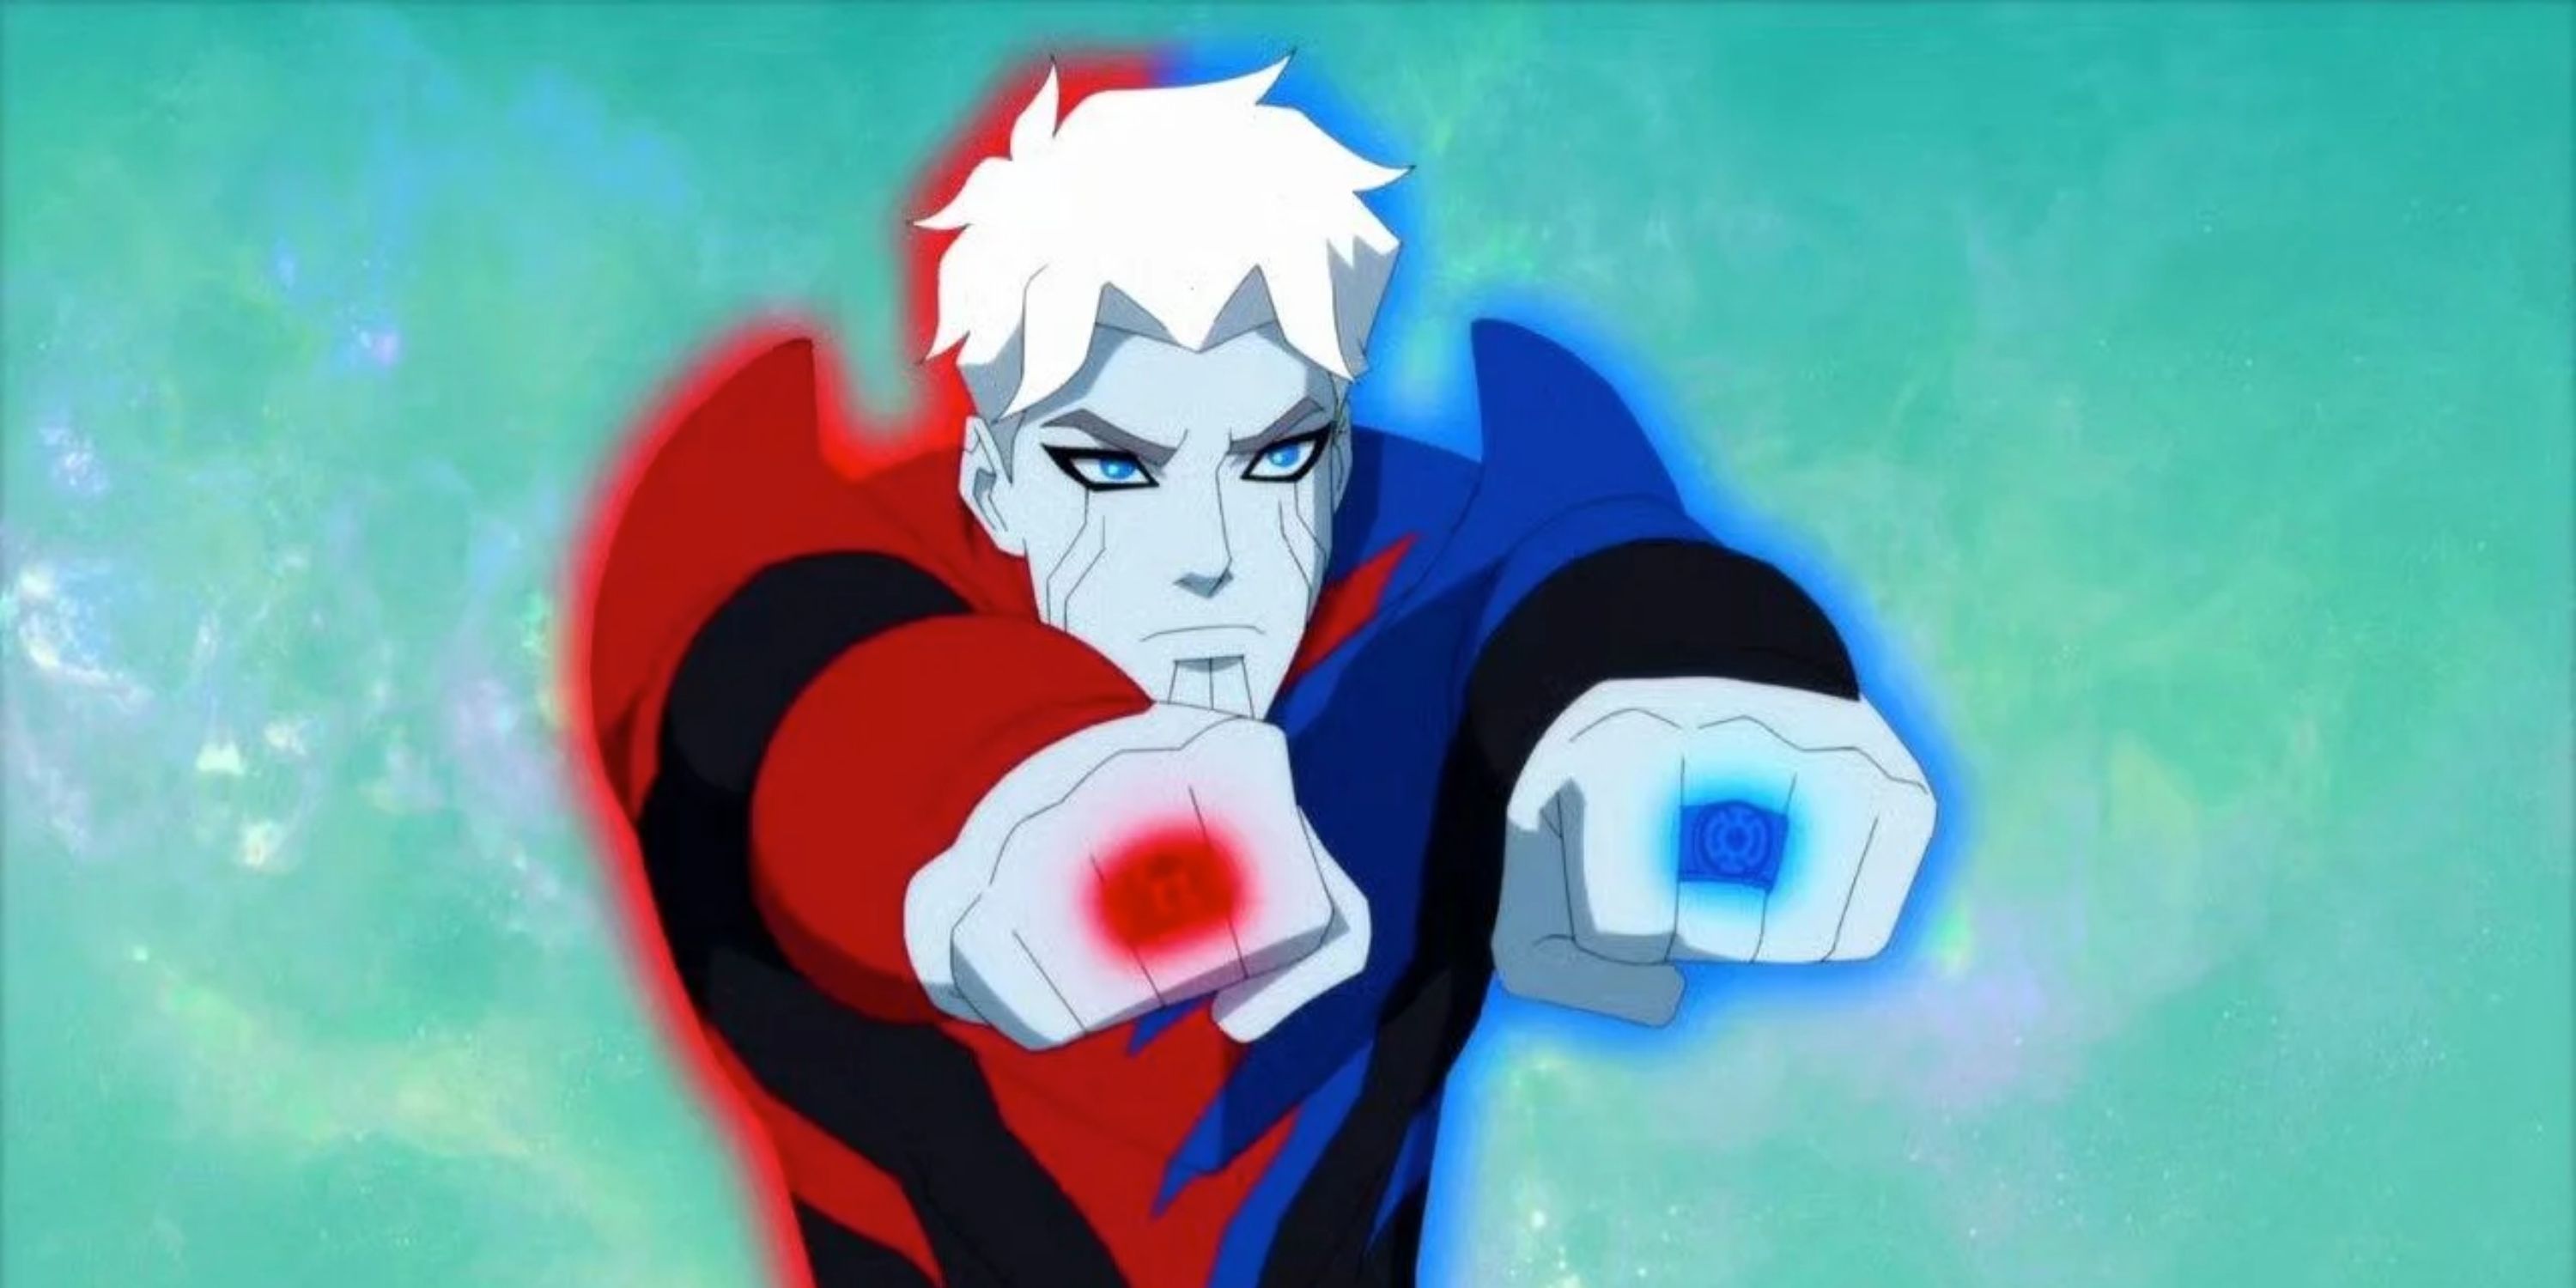 Razer using a red and blue power ring in Young Justice